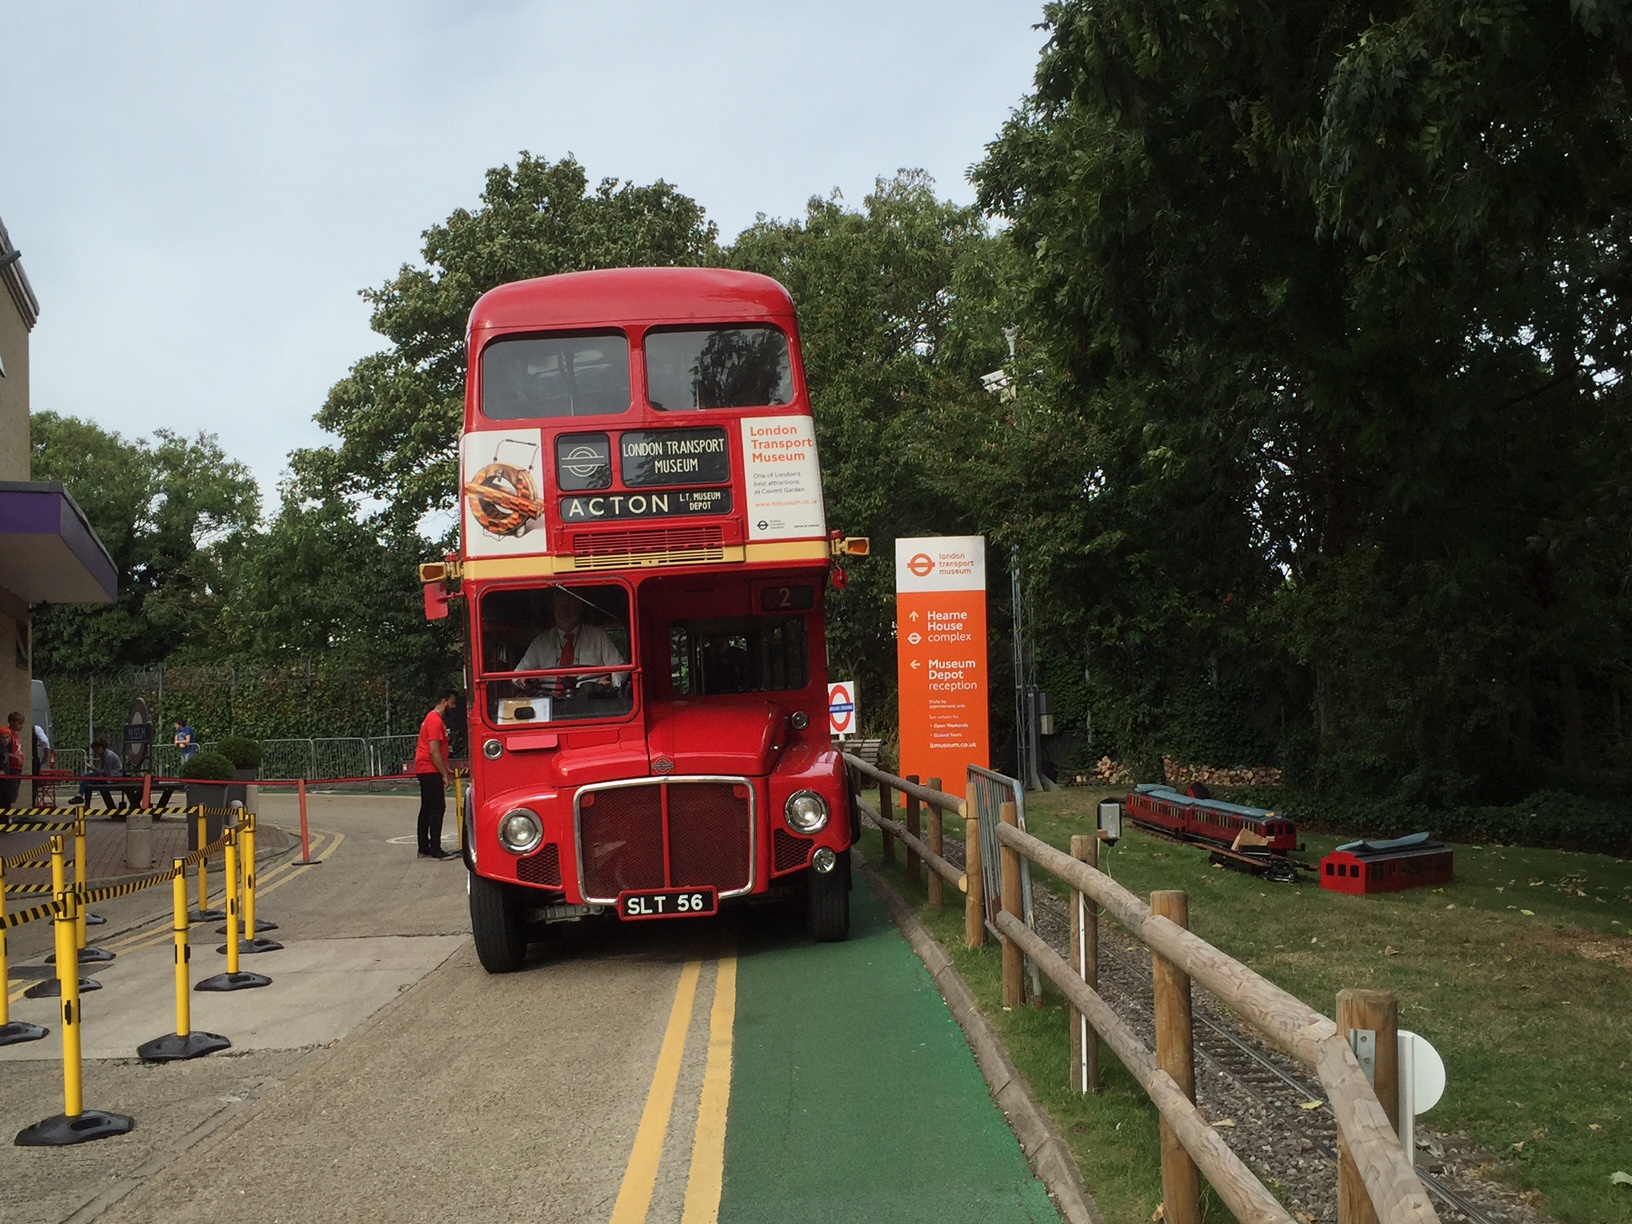 London Transport Museum: This is better. Free rides around the Acton area on an iconic 1950s Routemaster.